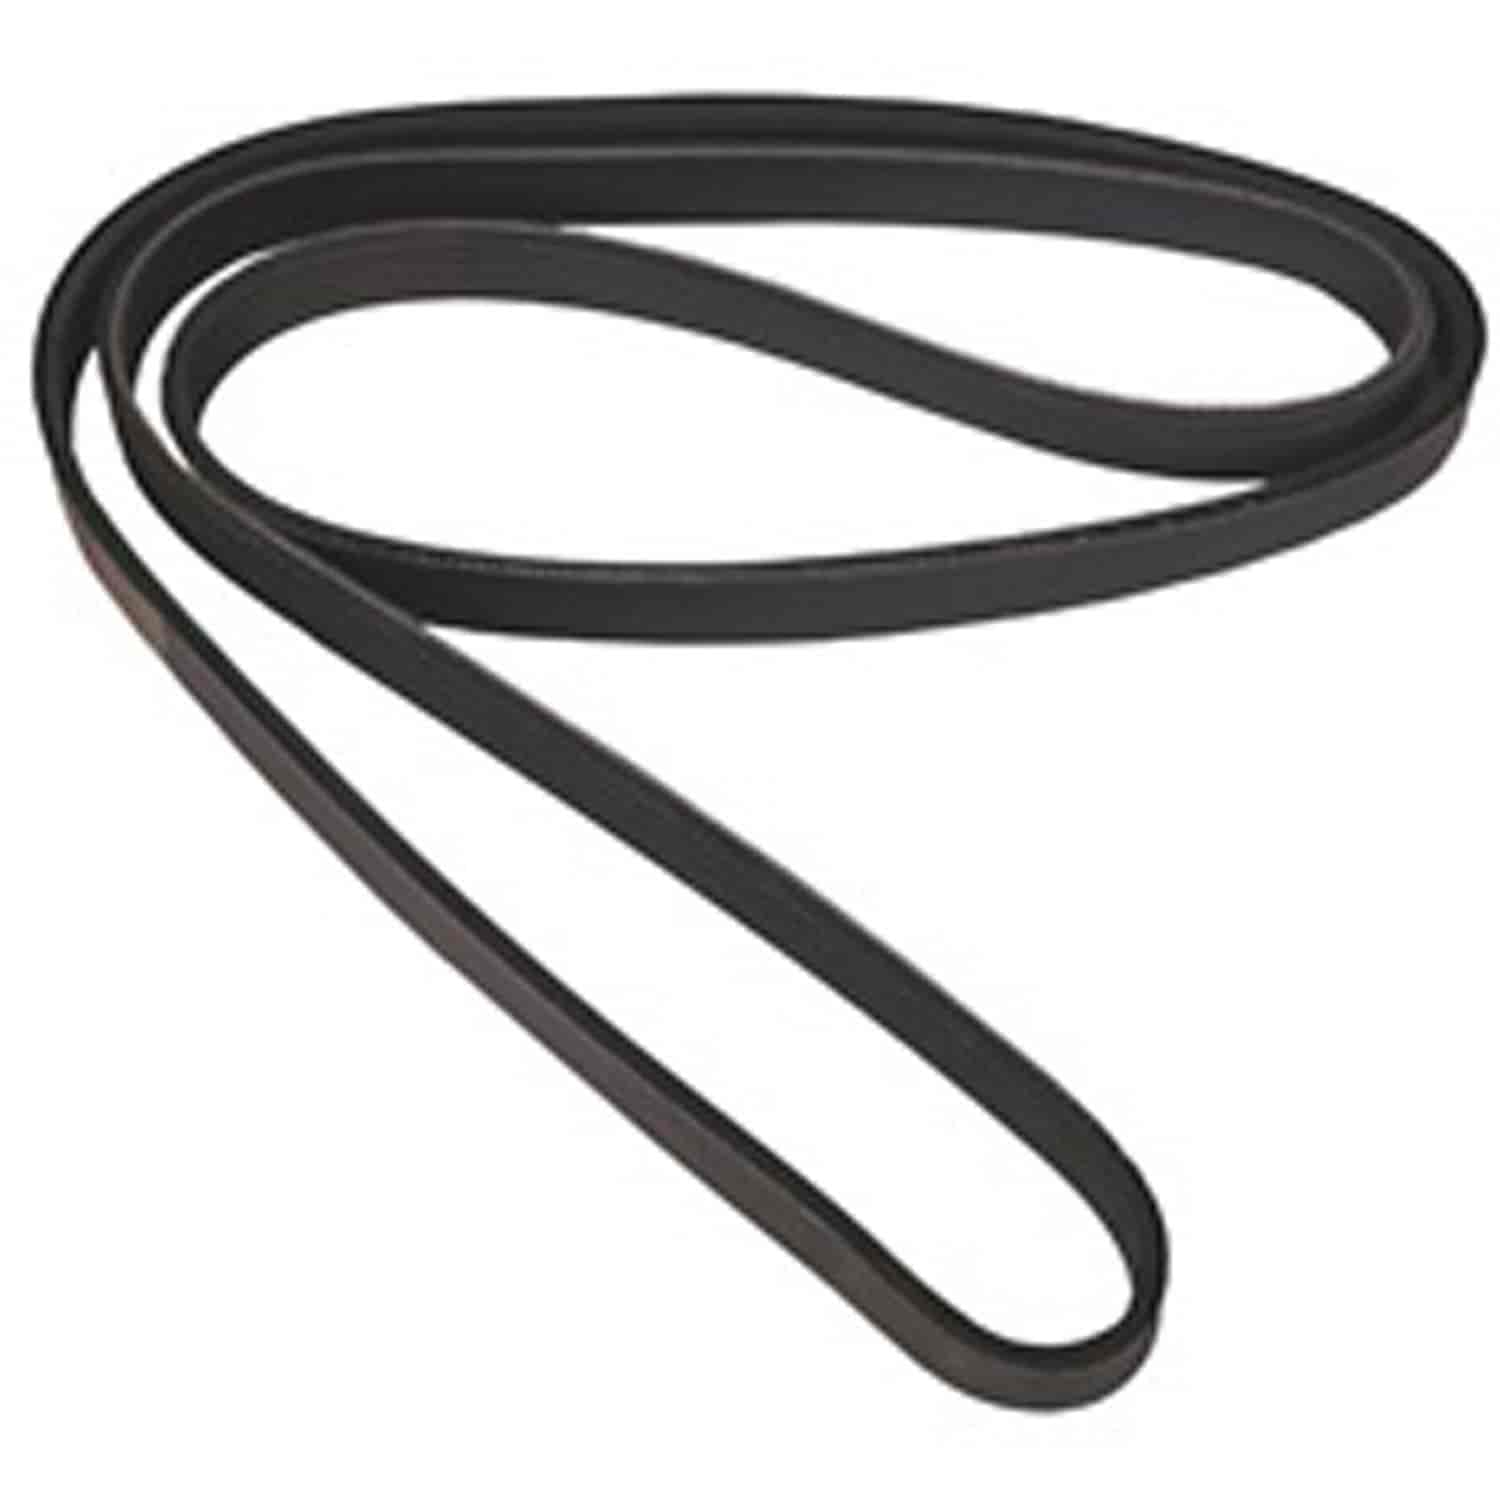 Stock replacement serpentine belt from Omix-ADA, Fits 91-95 RHD Jeep Cherokee XJ with 4.0 liter engine.